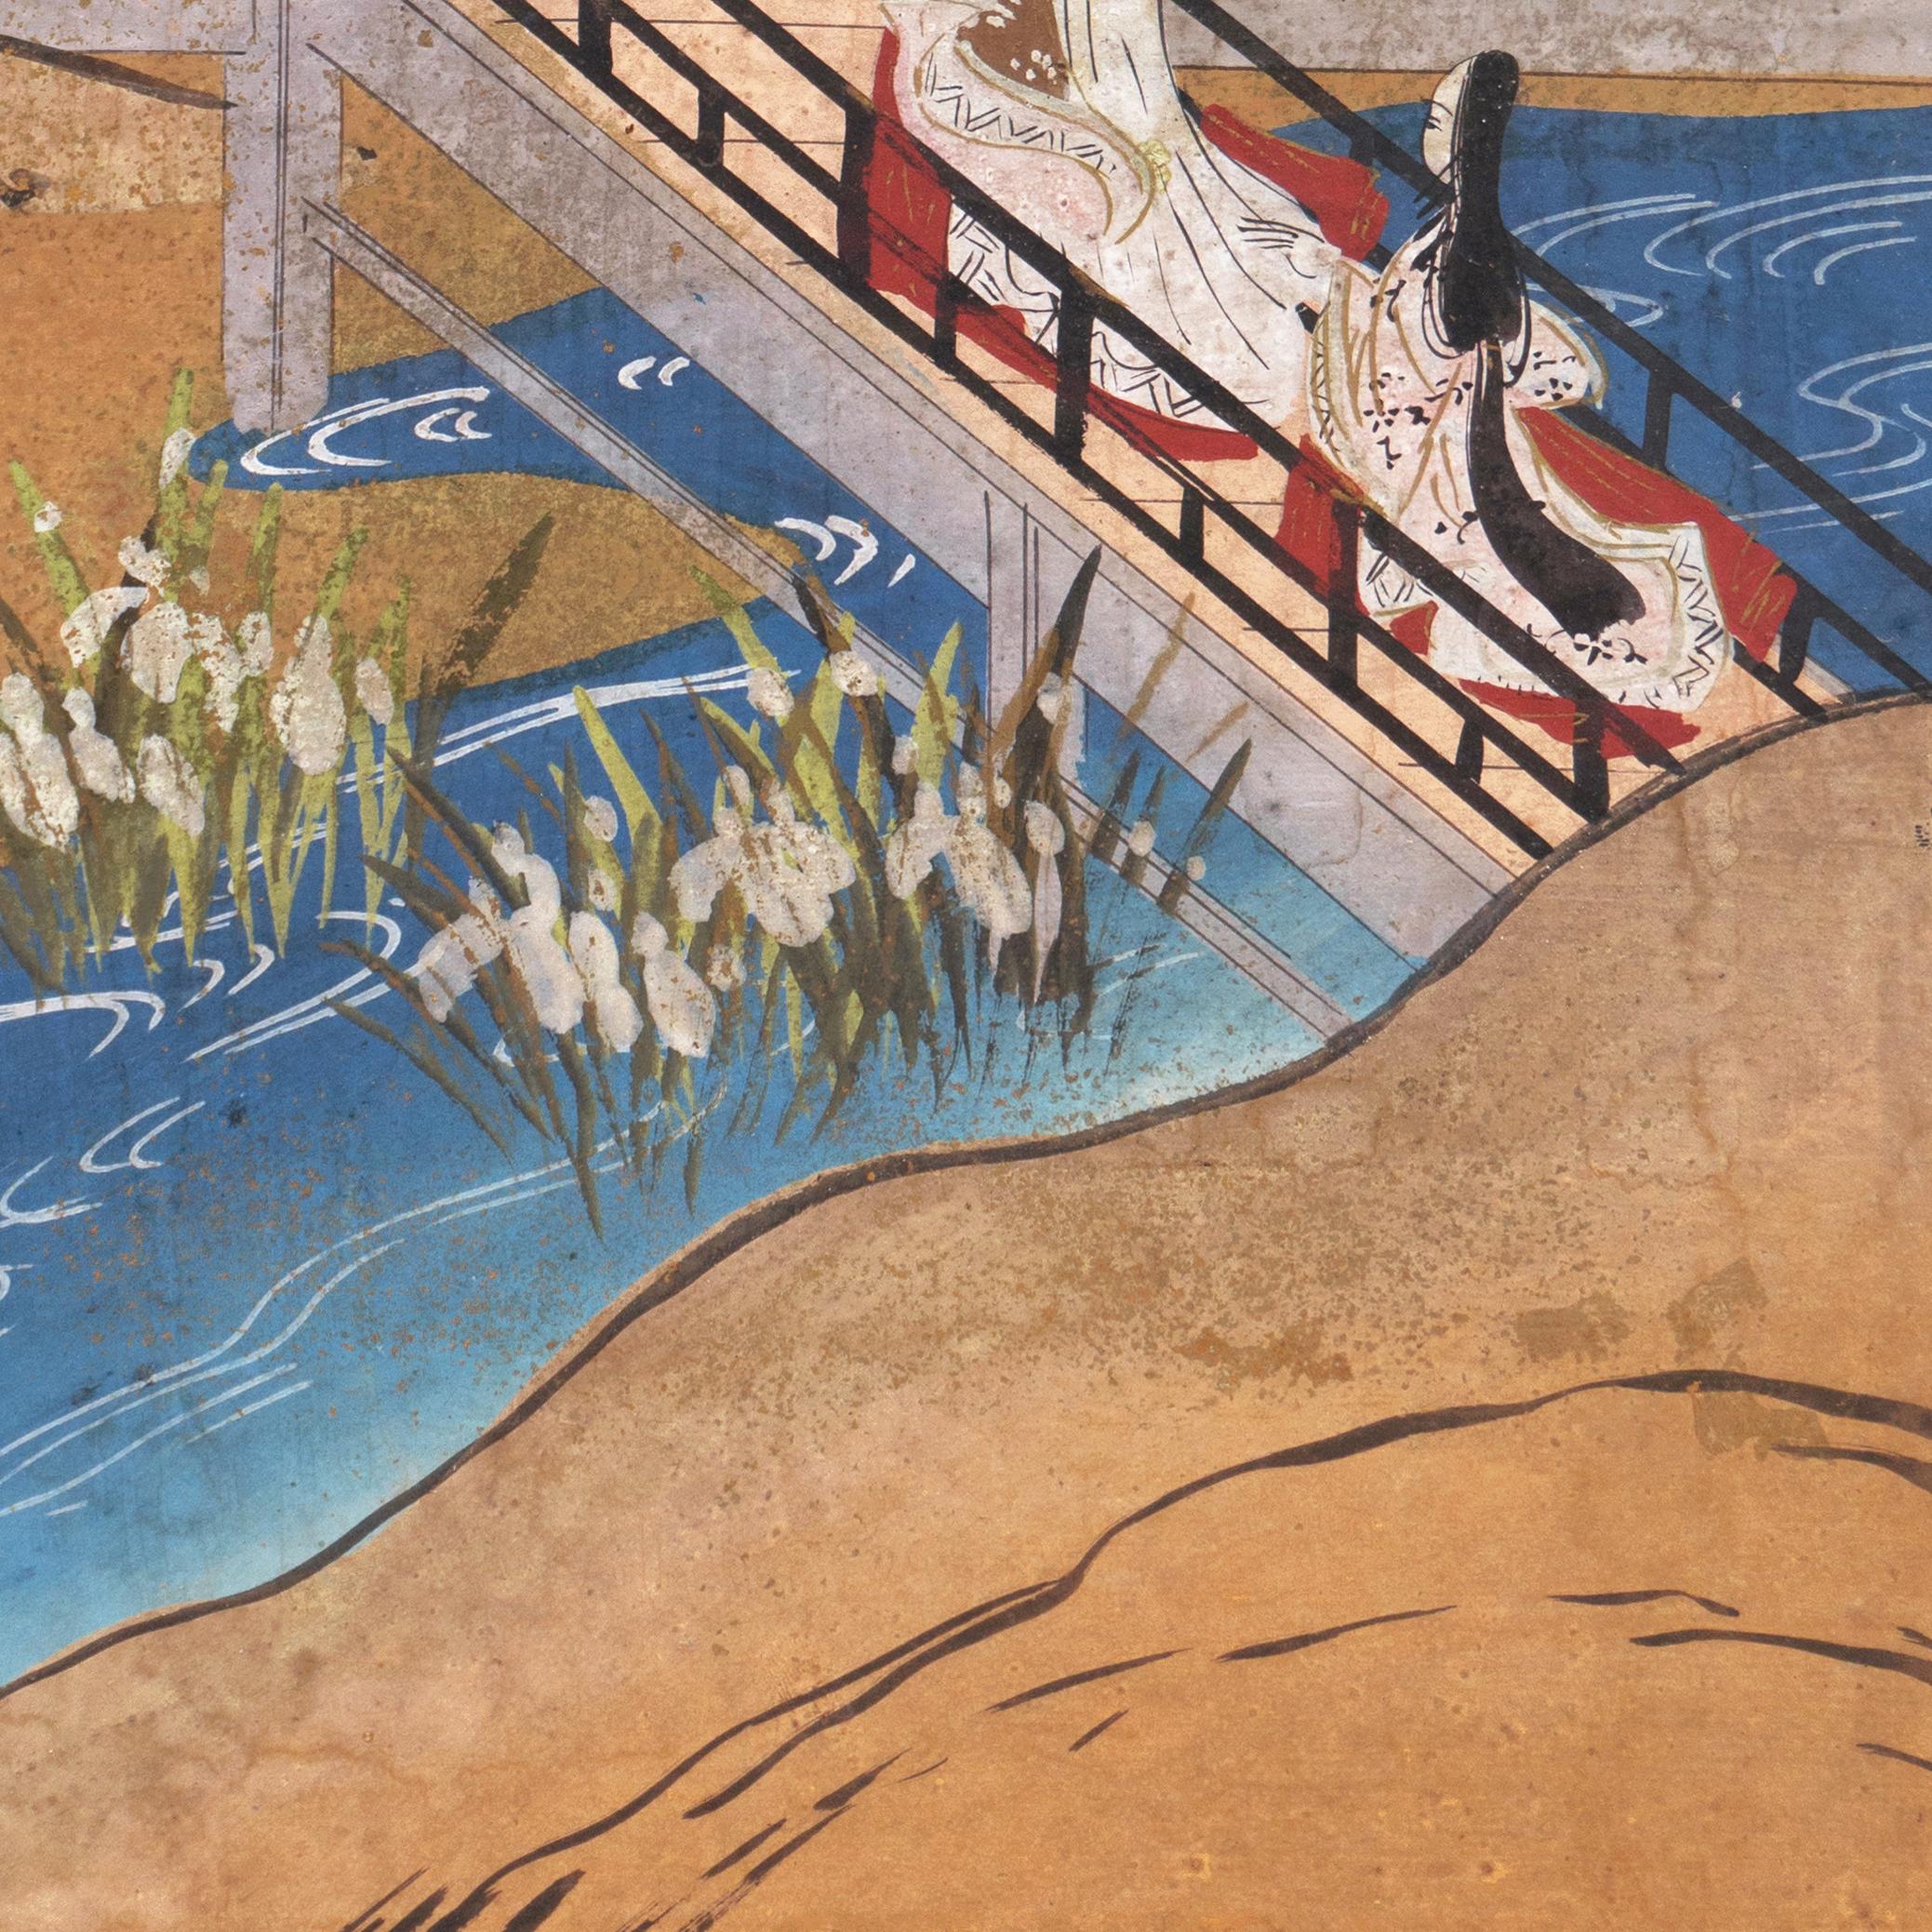 'Garden Landscape with River', 19th Century Kano School  - Gold Landscape Painting by Unknown